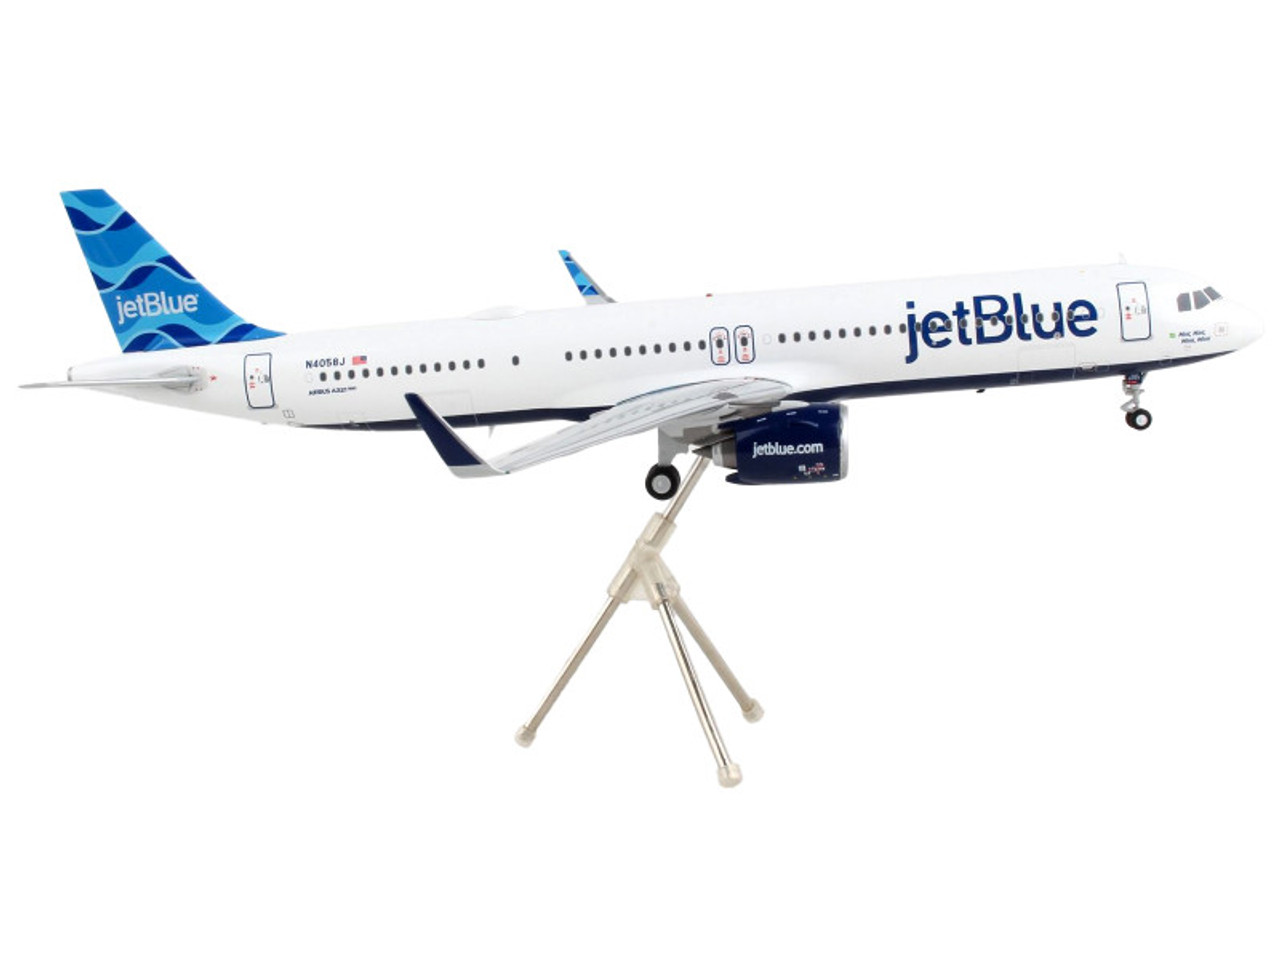 Airbus A321neo Commercial Aircraft "JetBlue Airways" White with Blue Tail "Gemini 200" Series 1/200 Diecast Model Airplane by GeminiJets